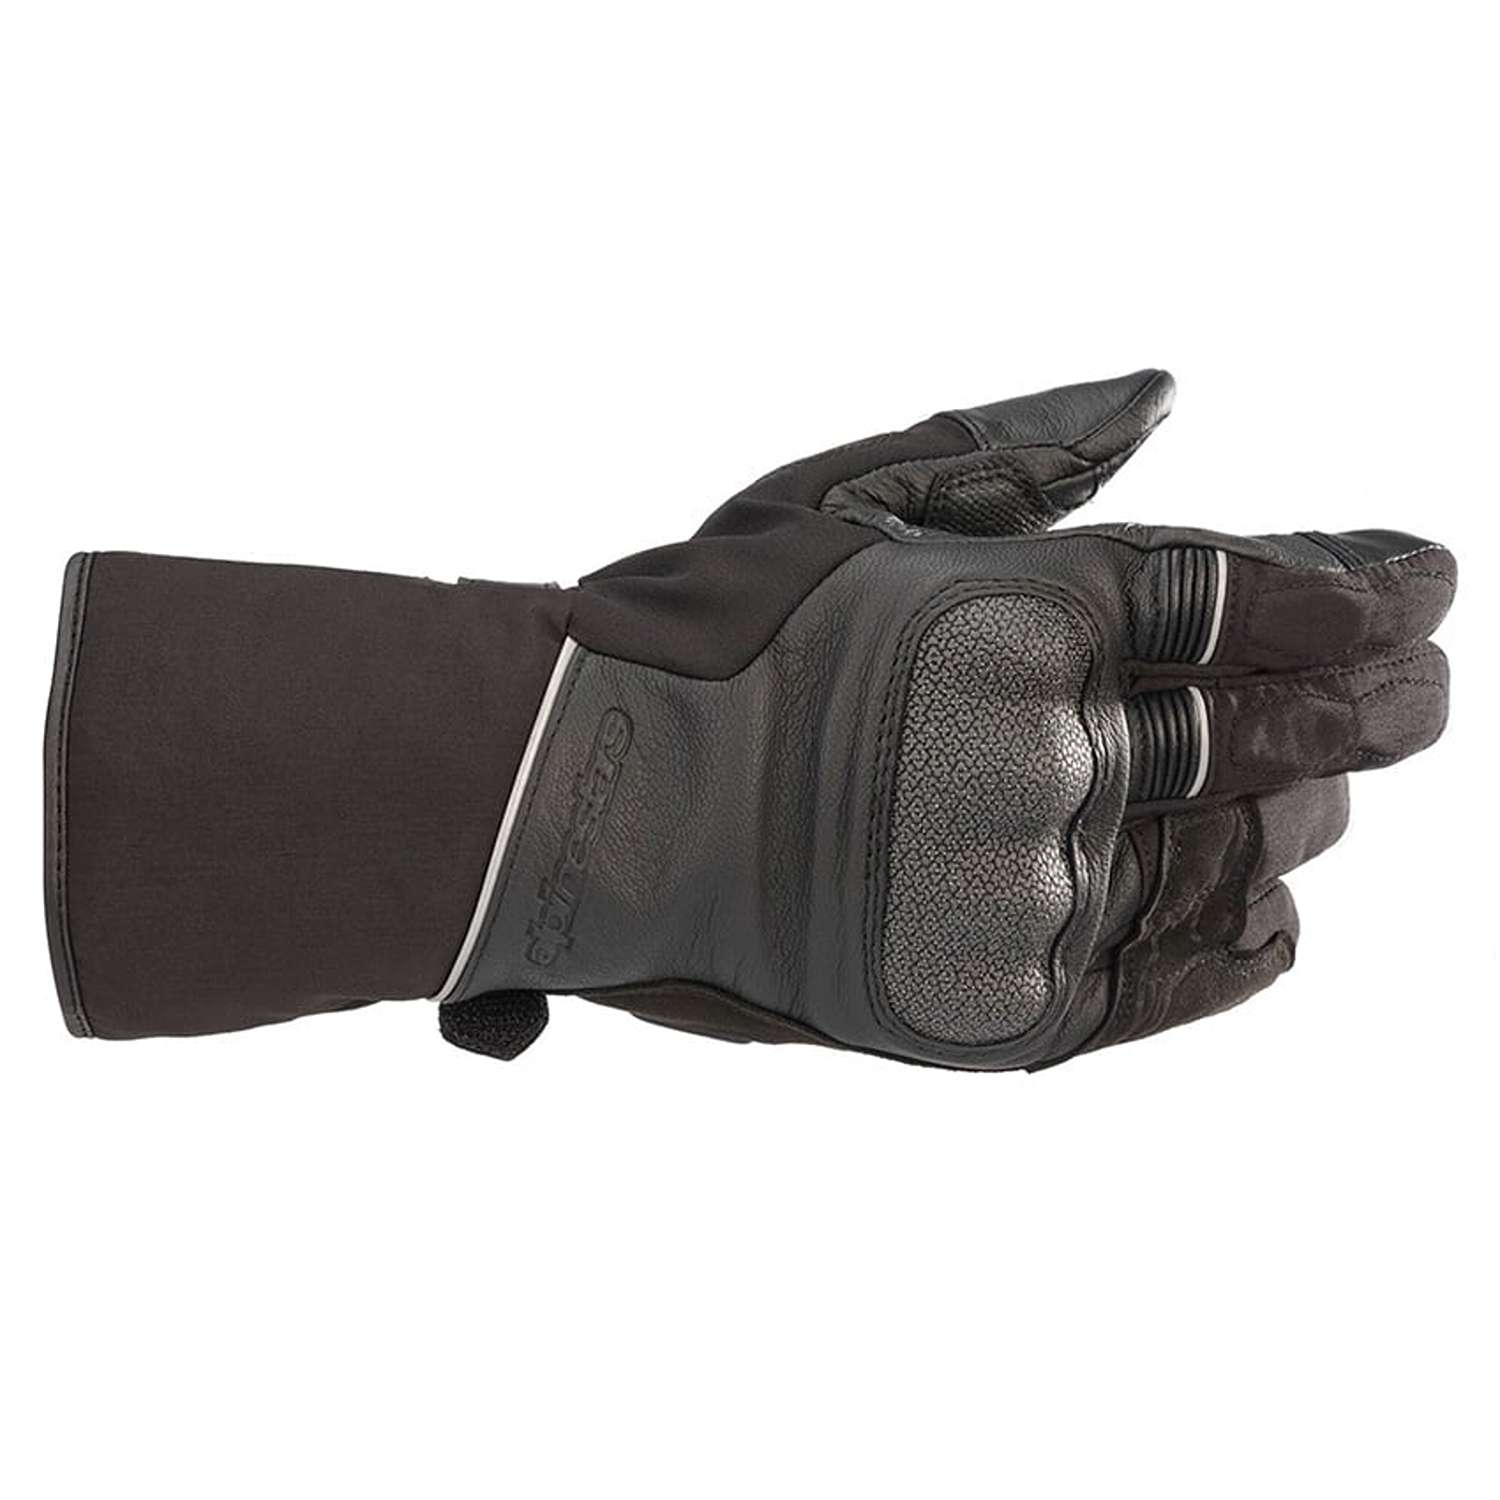 Image of Alpinestars Wr-2 V2 Gore-Tex Gloves With Gore Grip Technology Black Taille XL